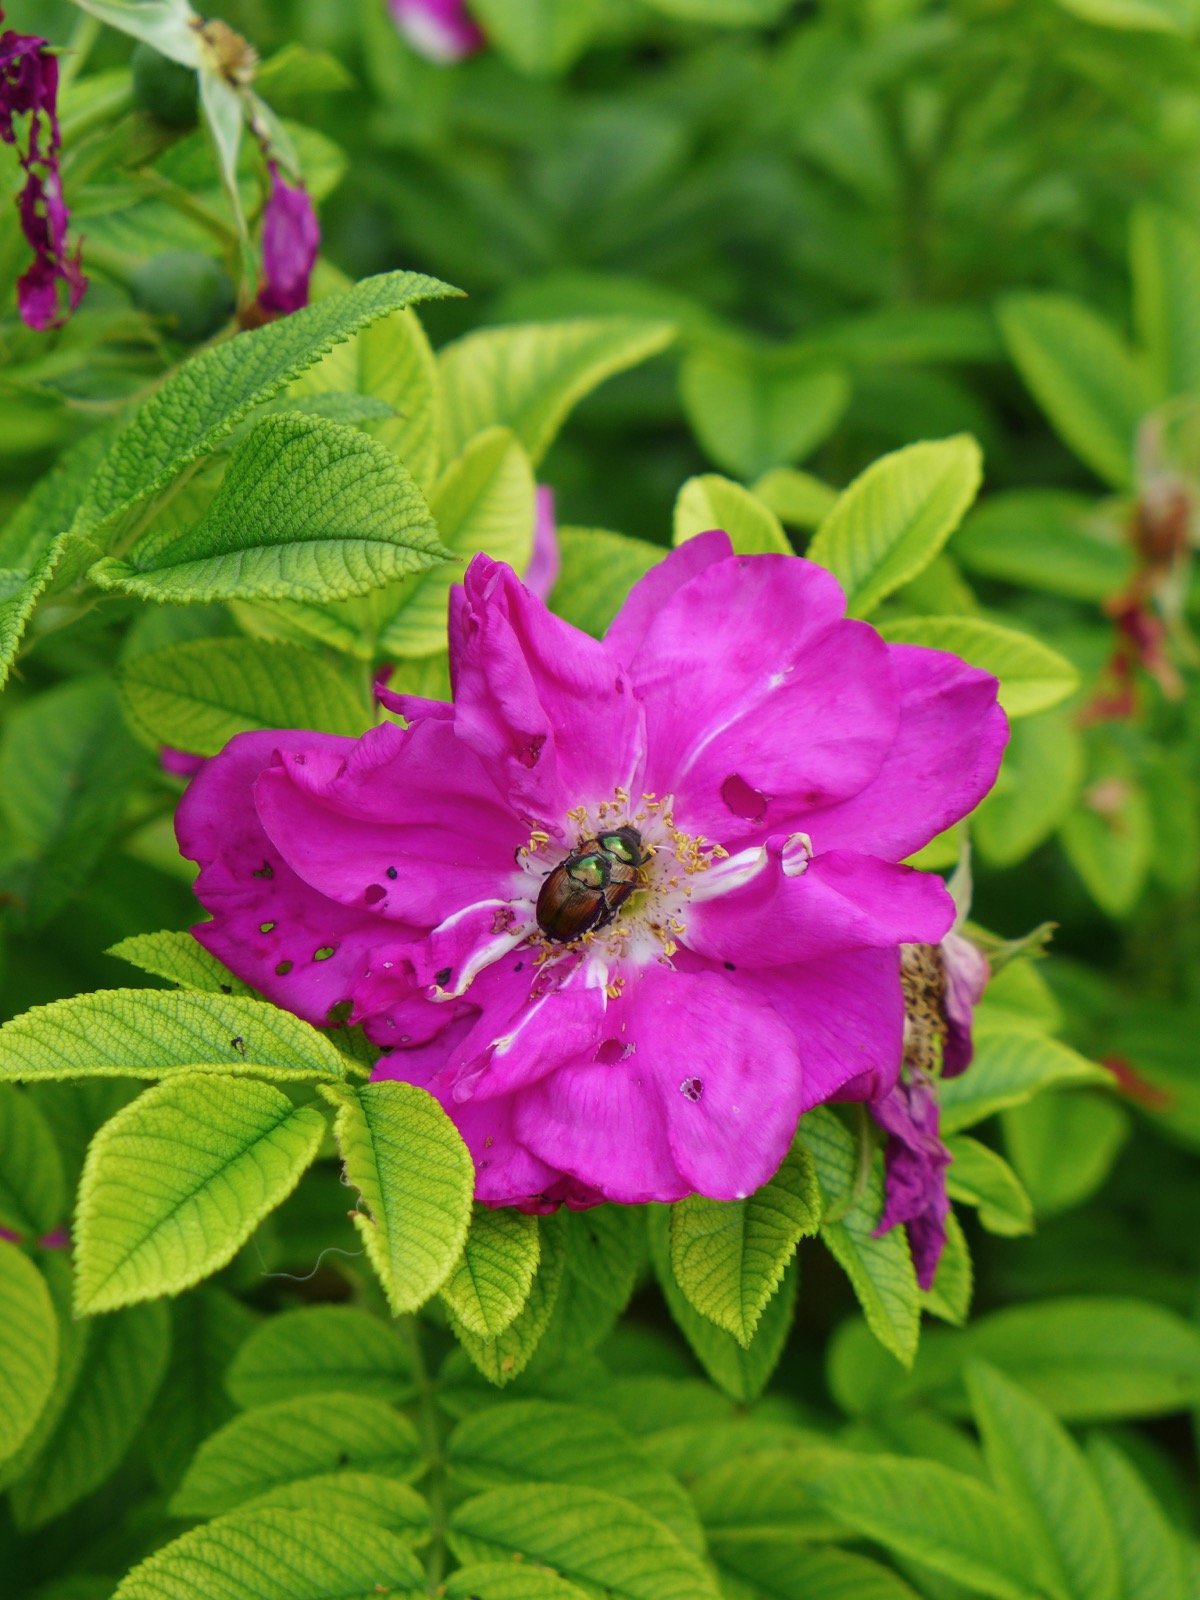 Two Japanese beetles in a flower